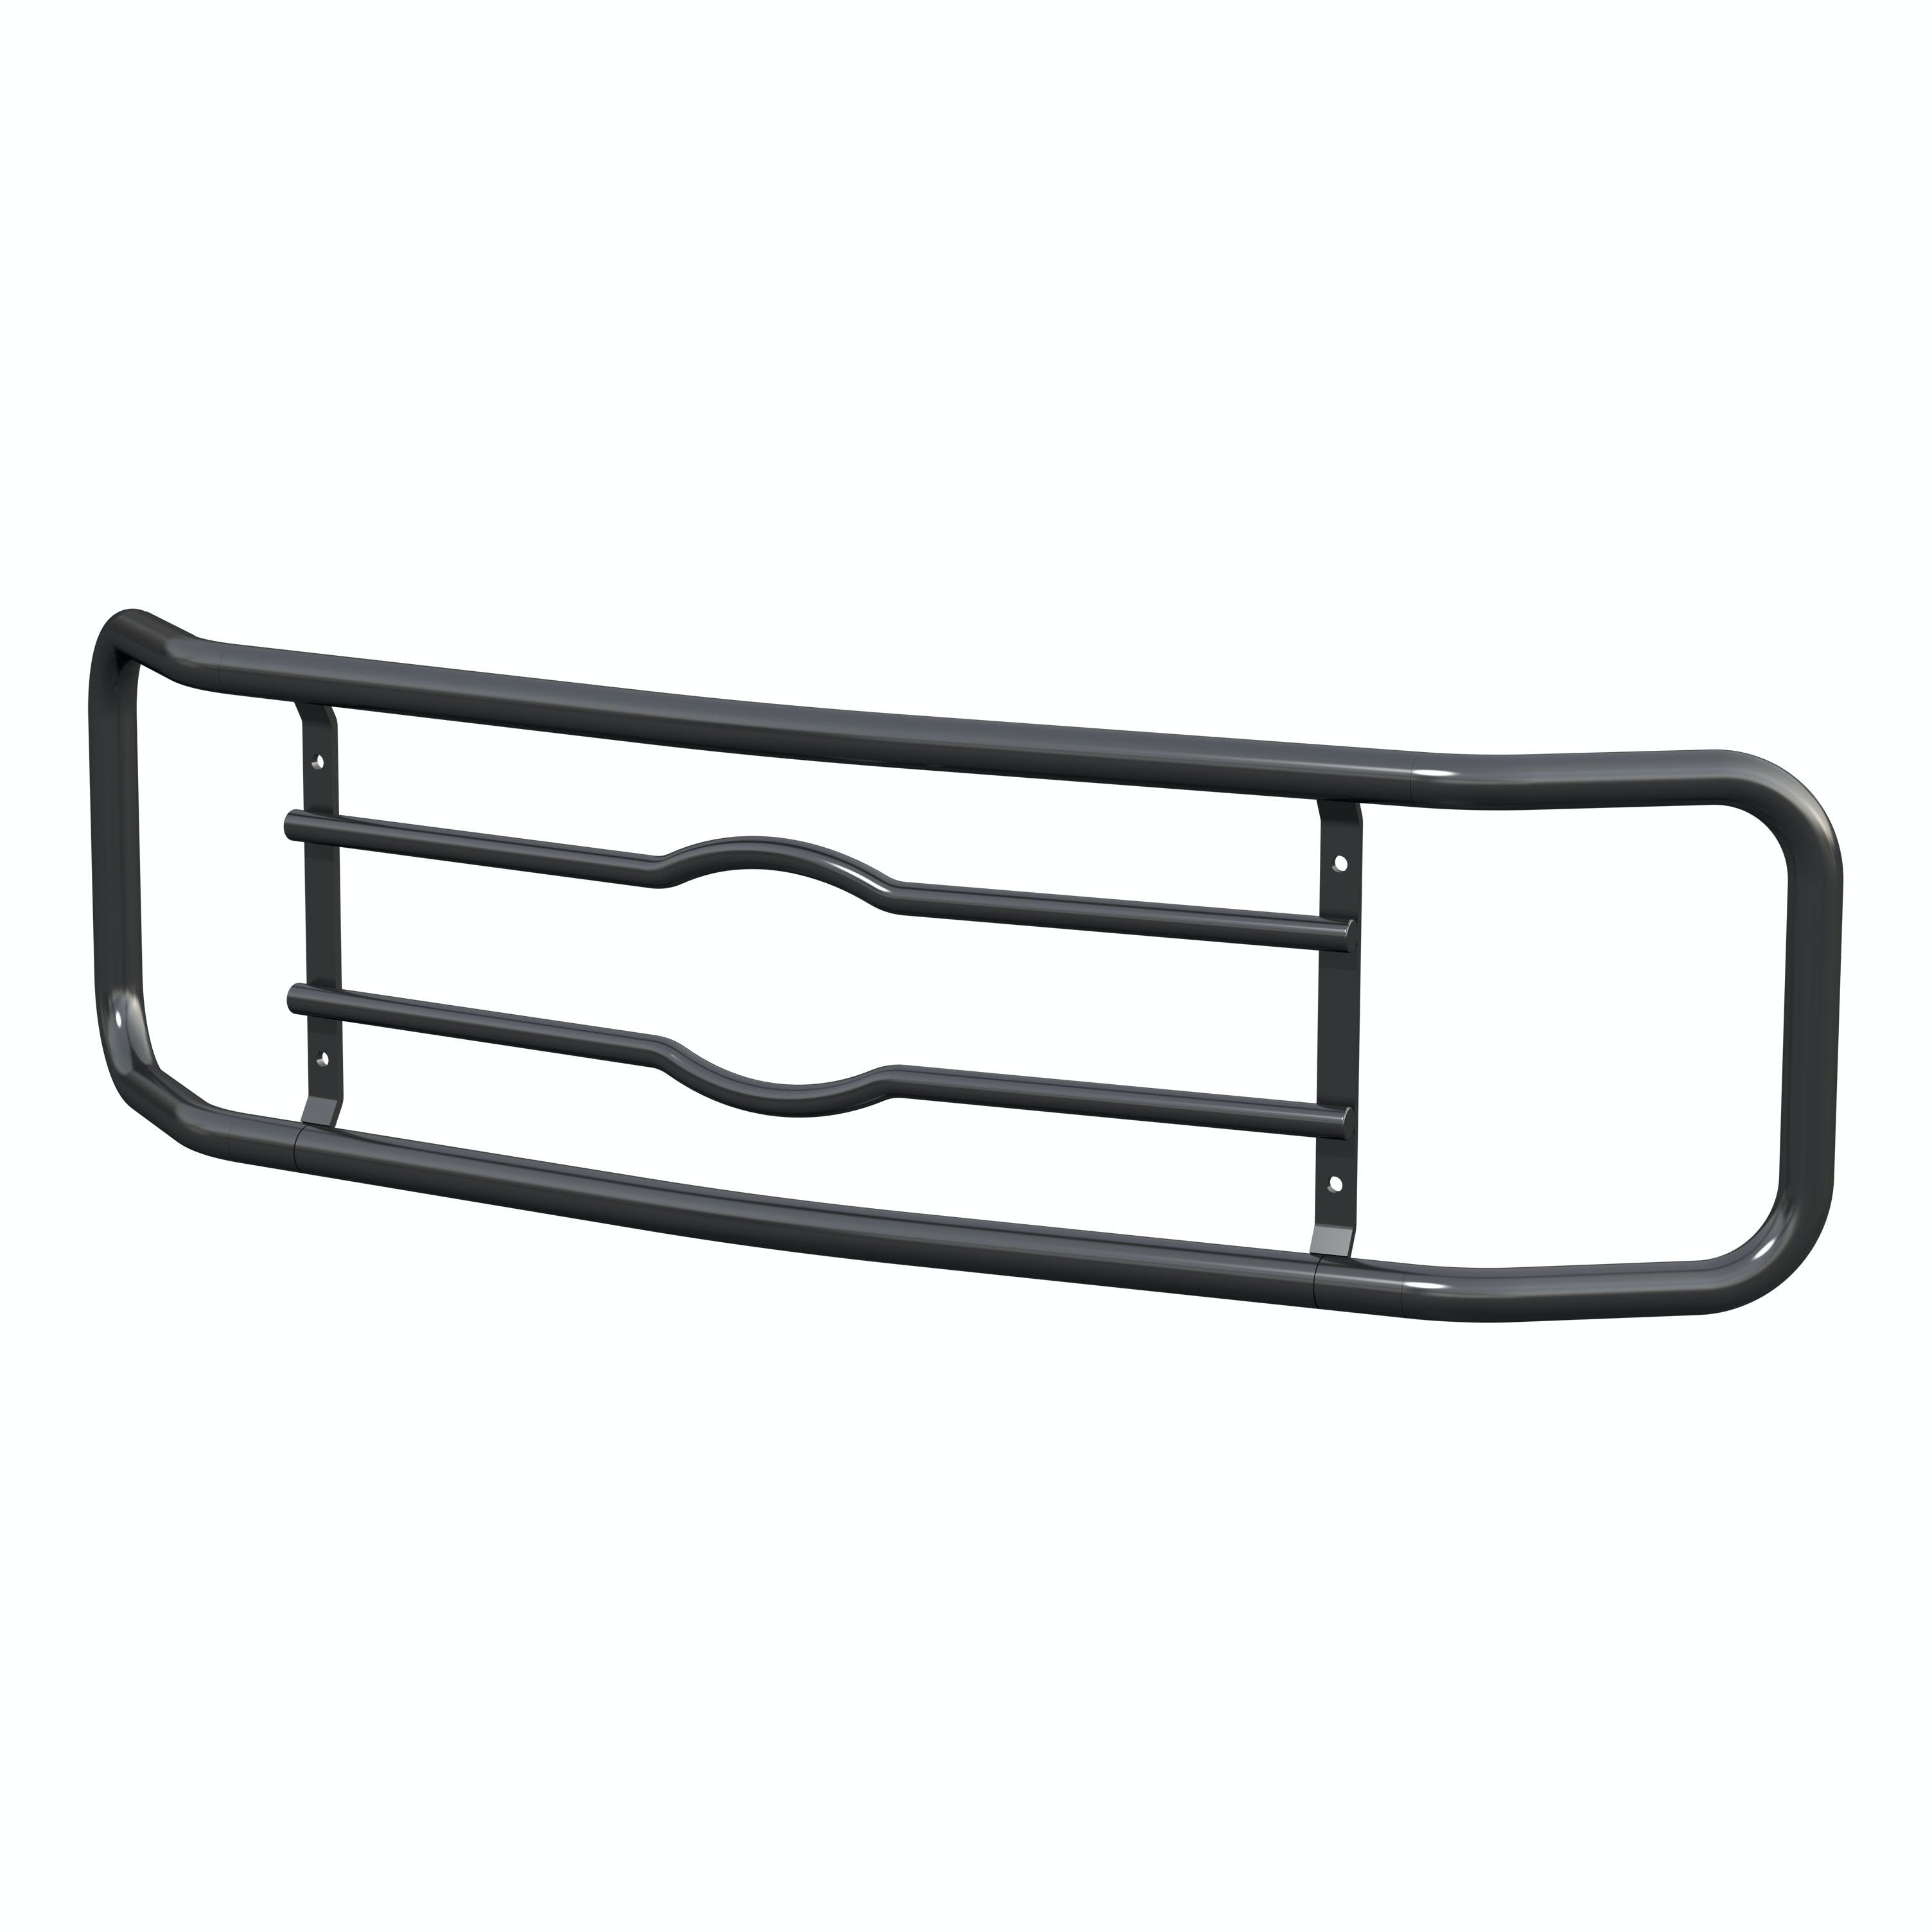 LUVERNE 341723 2 inch Tubular Grille Guard Ring Assembly